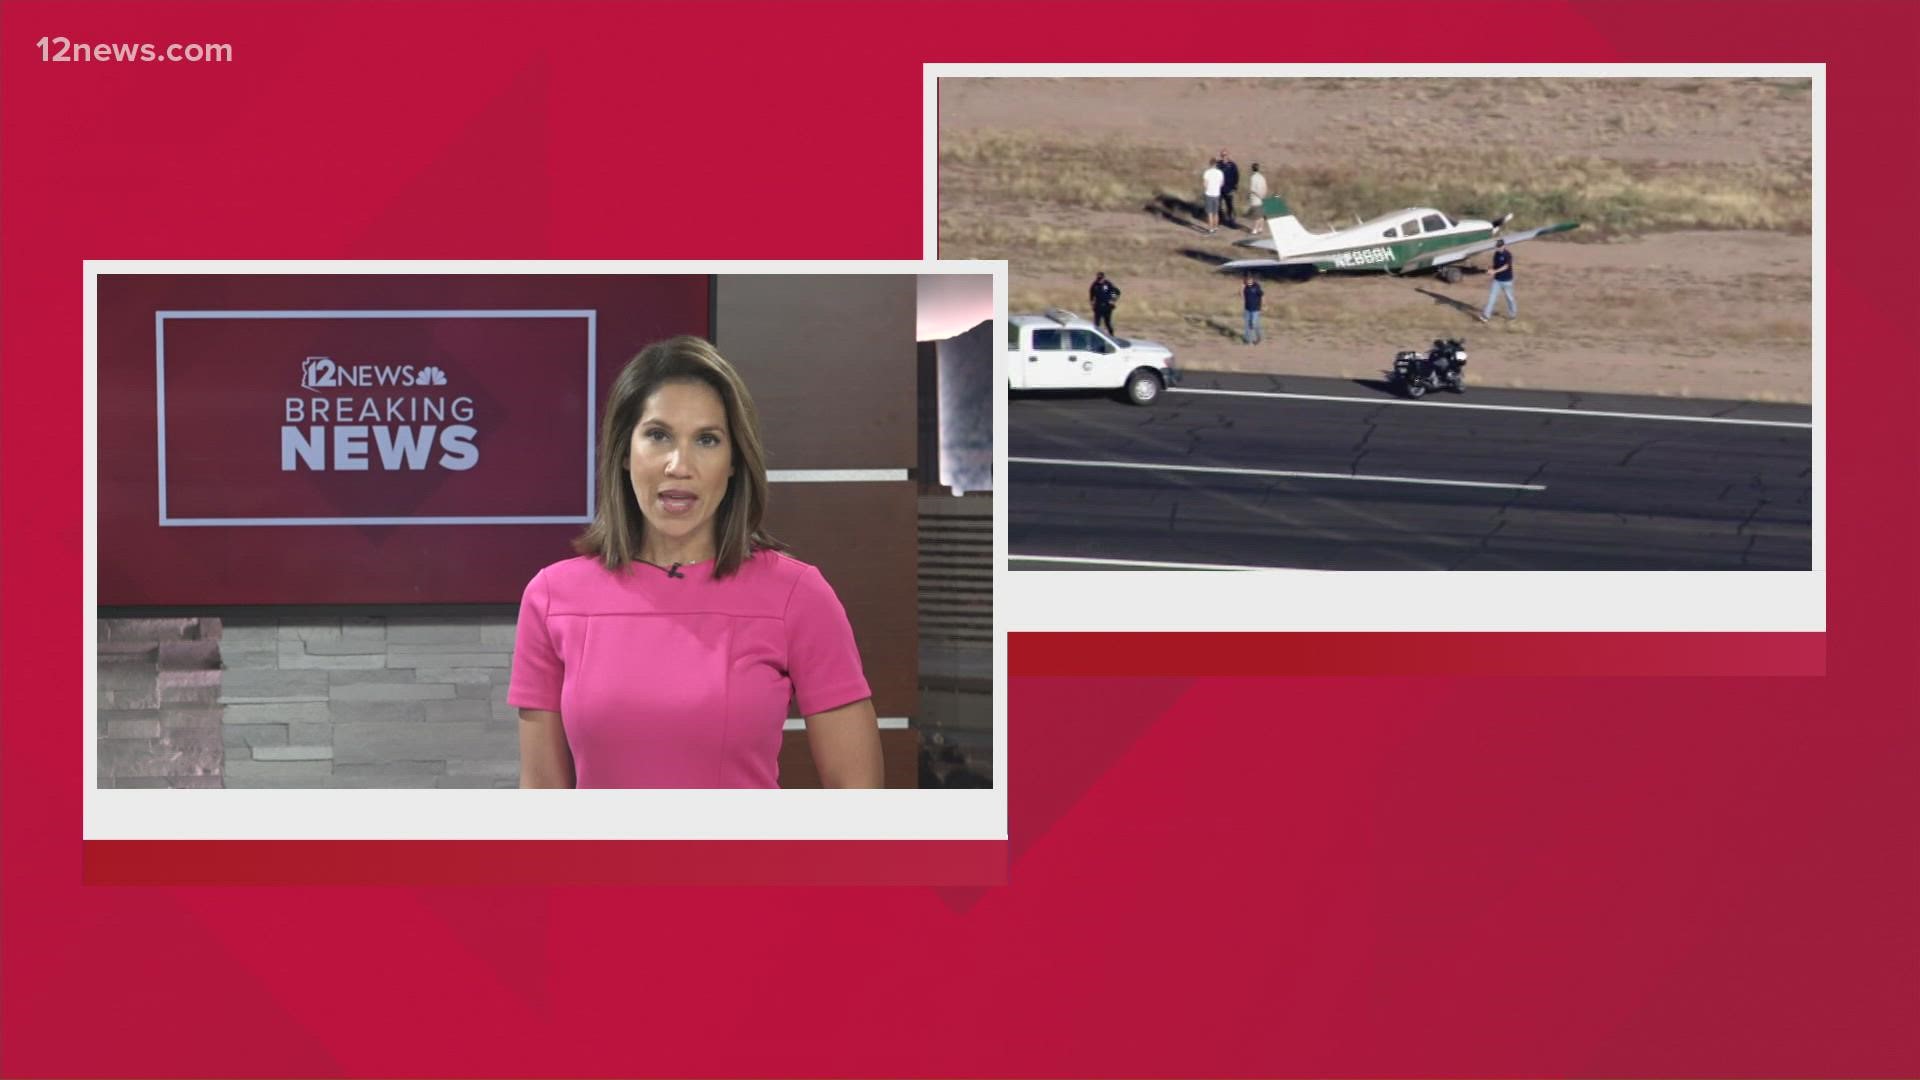 Authorities are on the scene of a crash site involving a helicopter and small plane in Chandler Friday morning. Here's what we know.